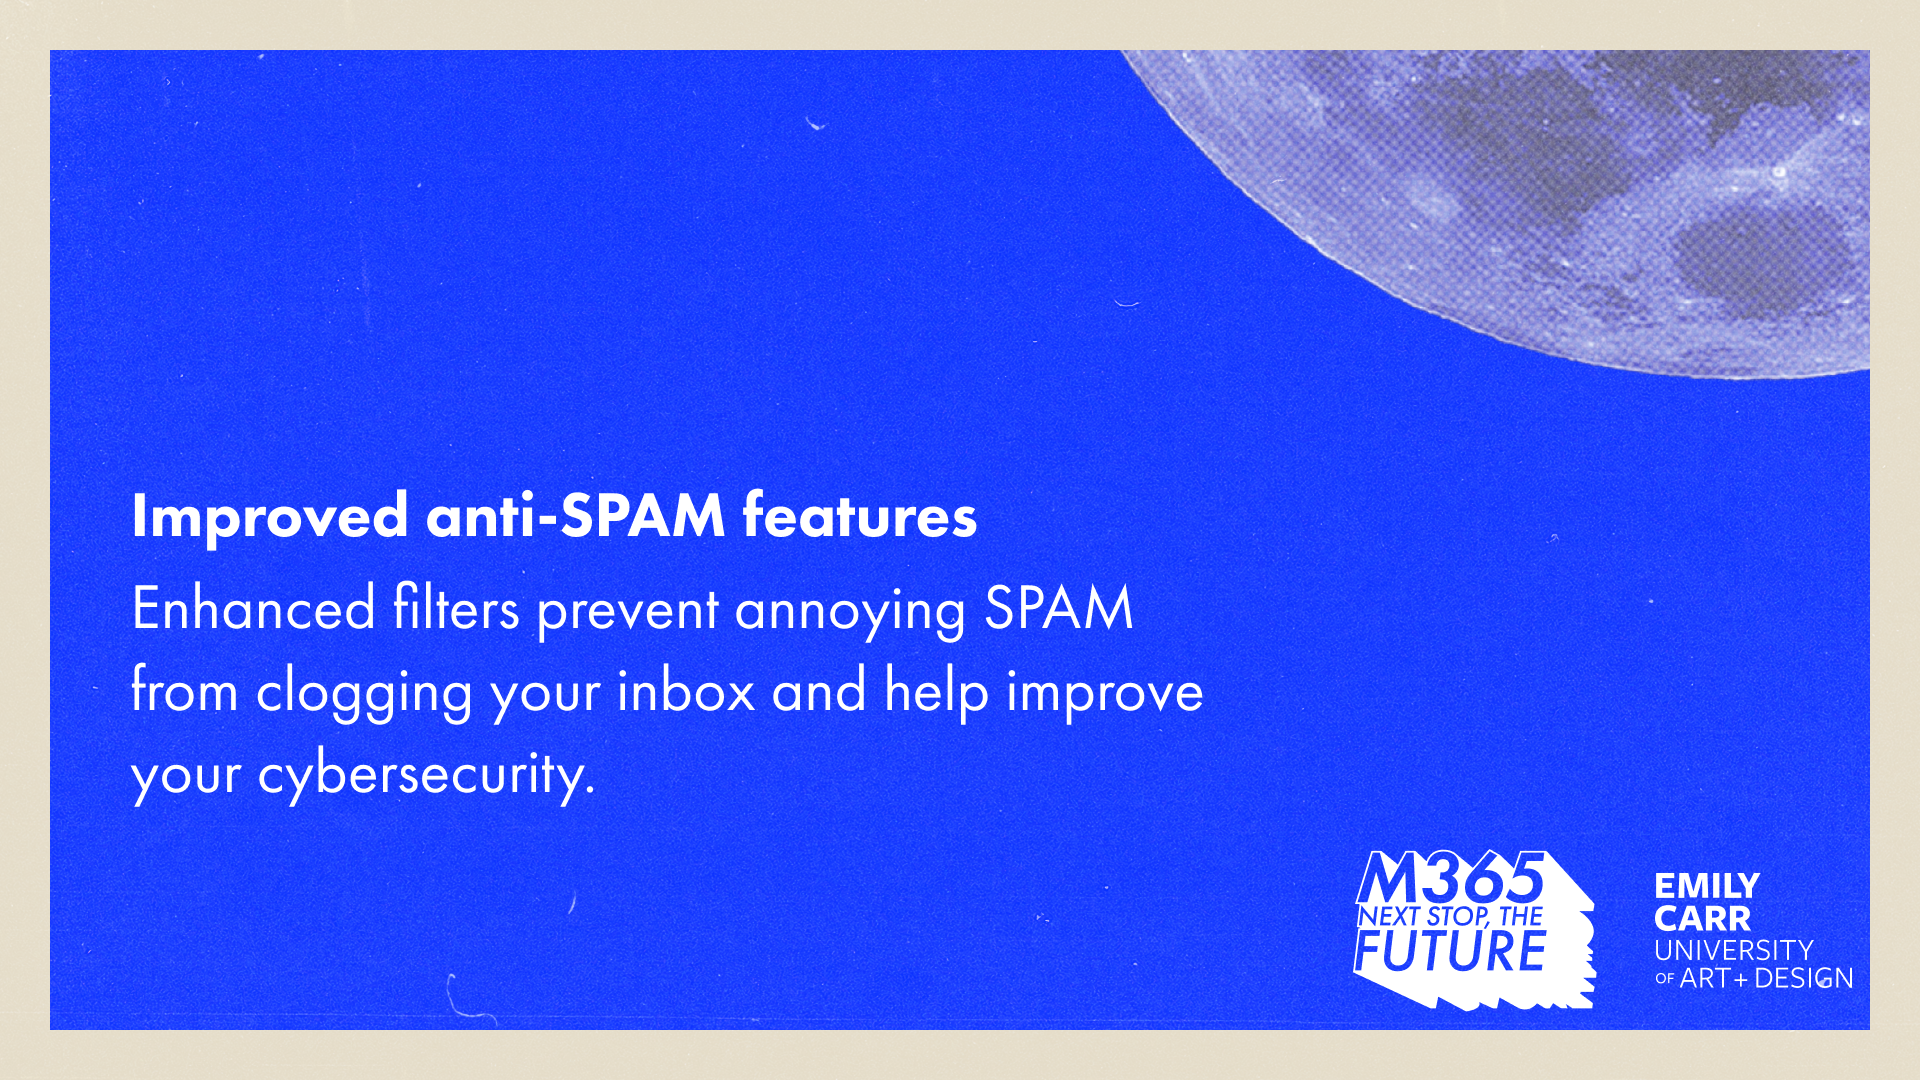 Text reads, "Improved anti-SPAM features. Enhanced filters prevent annoying SPAM from clogging your inbox and help improve your cybersecurity."